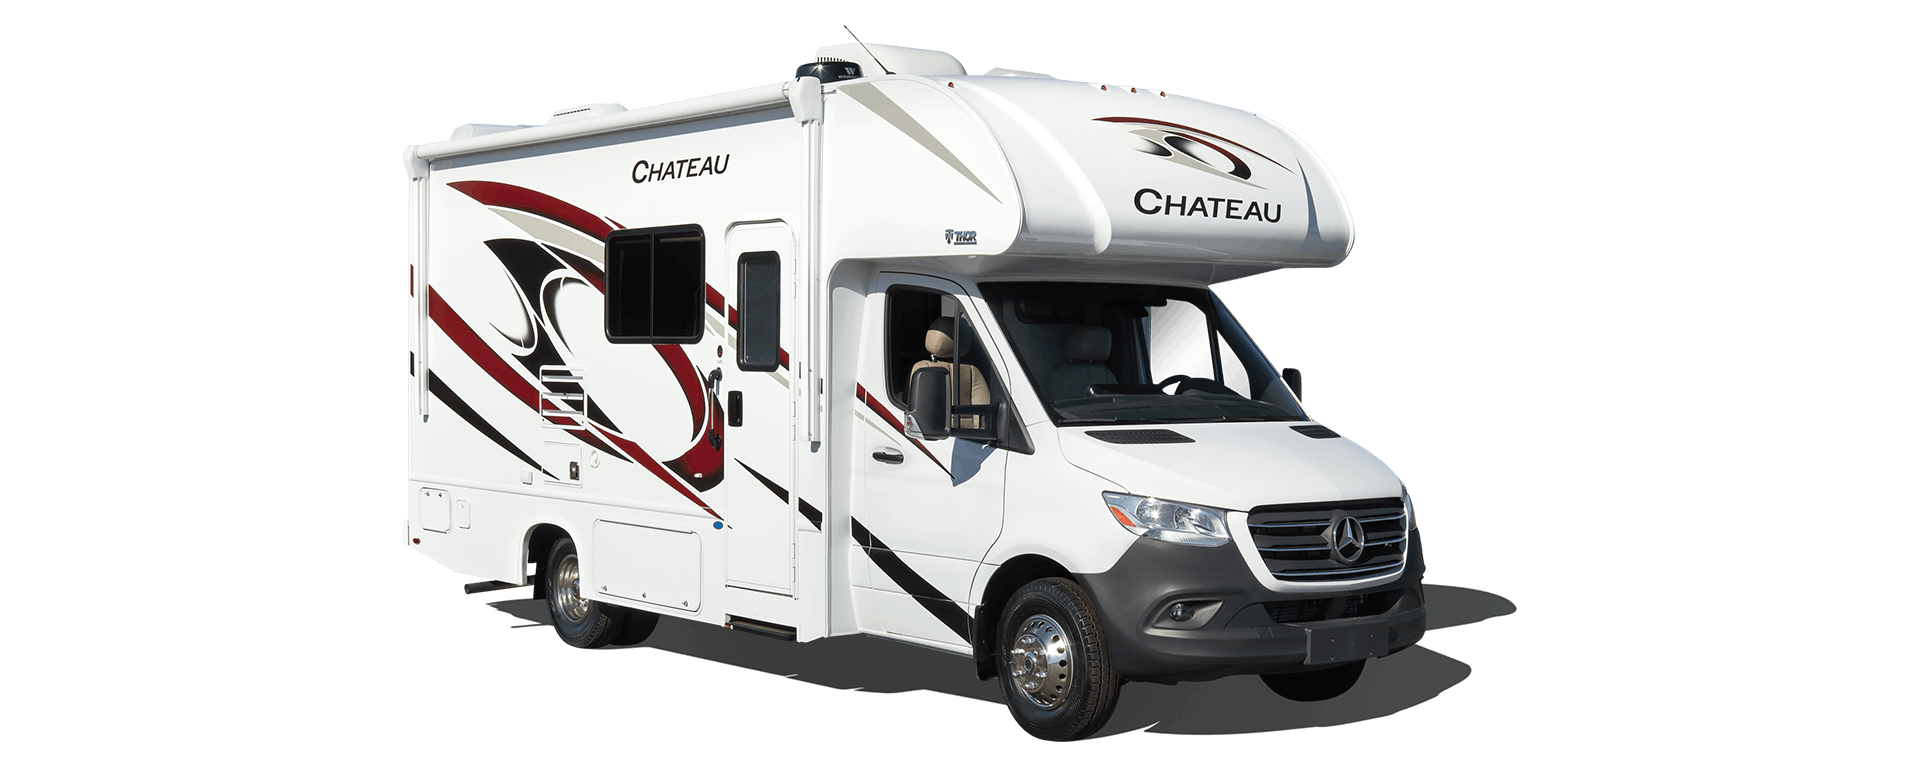 2022 Thor Chateau Mercedes Sprinter RV Rodeo Red Standard Graphics Exterior